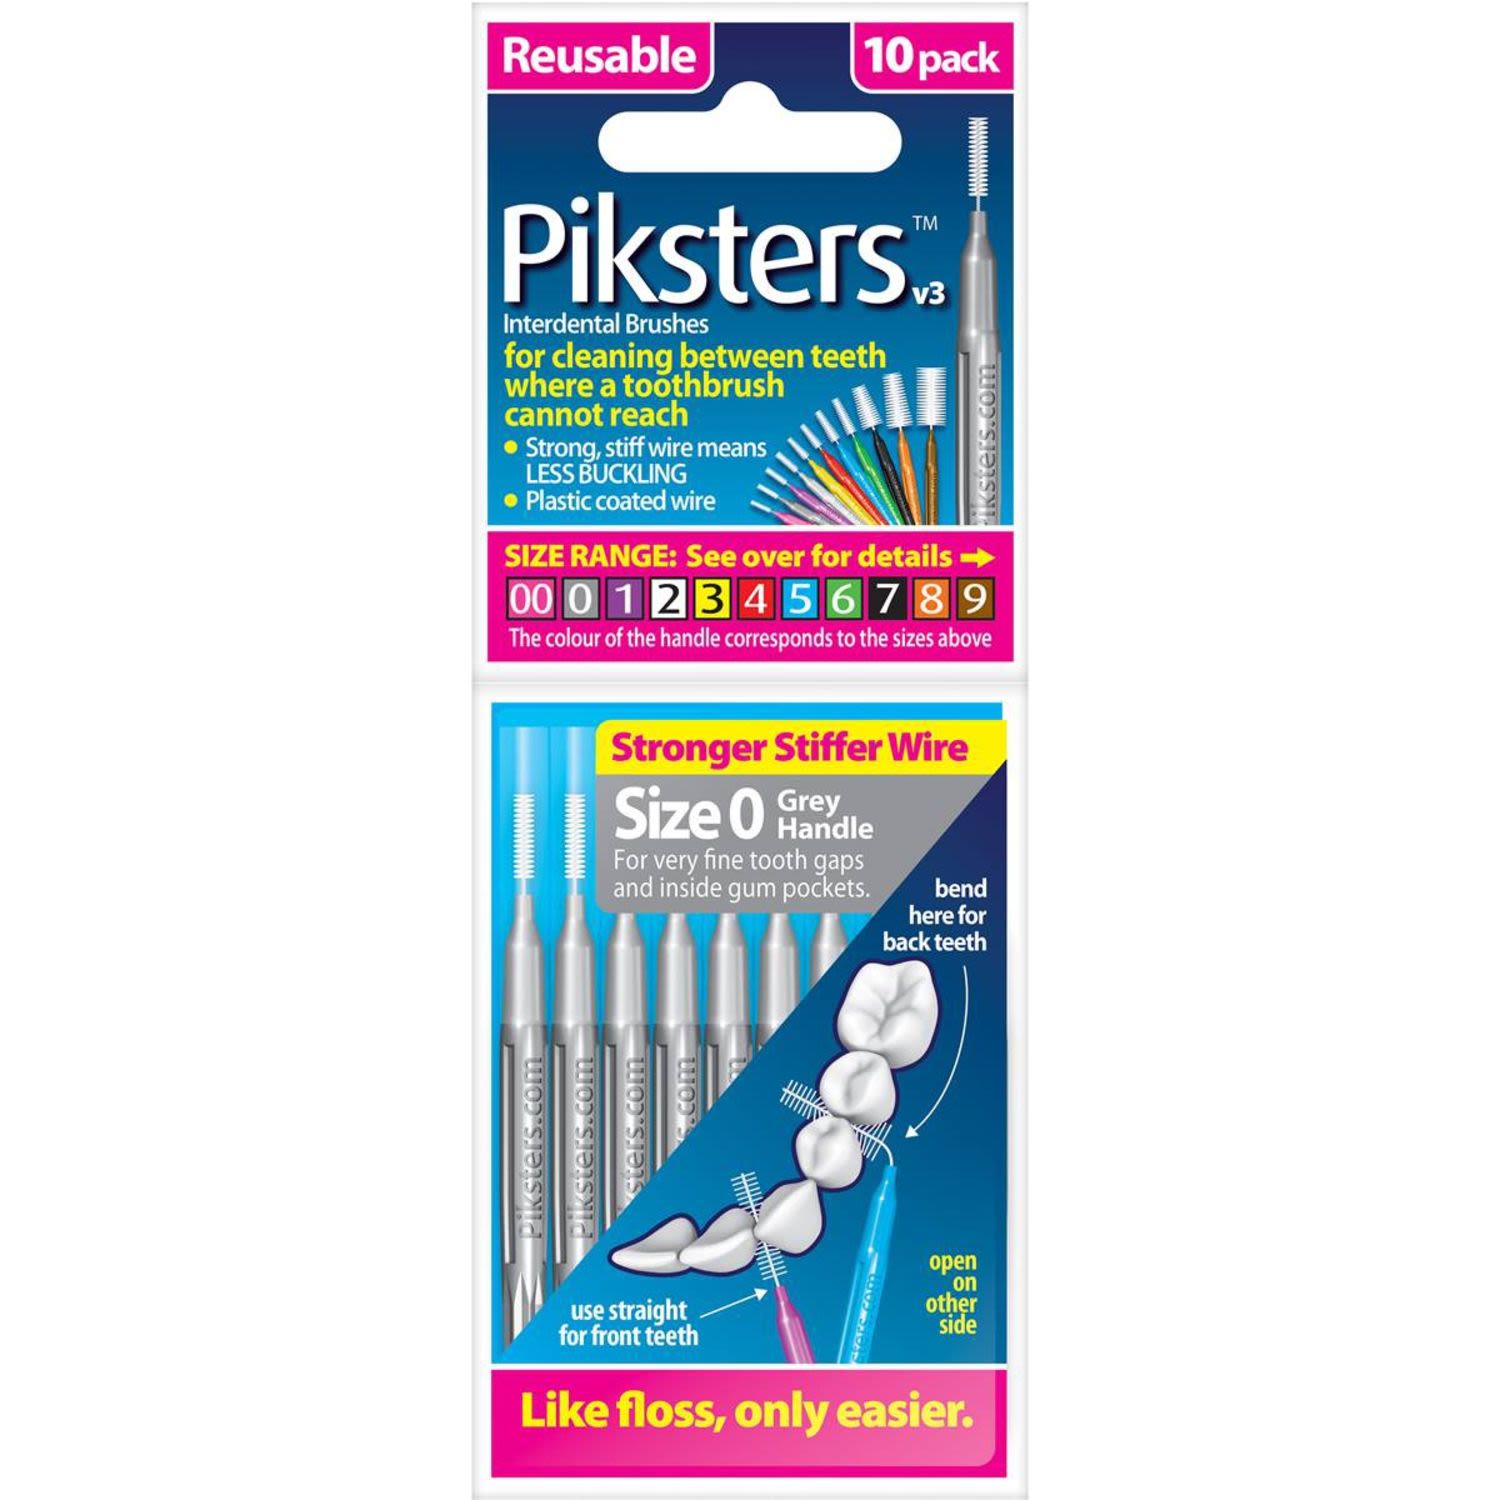 Piksters Interdental Brushes Size 0, 10 Each